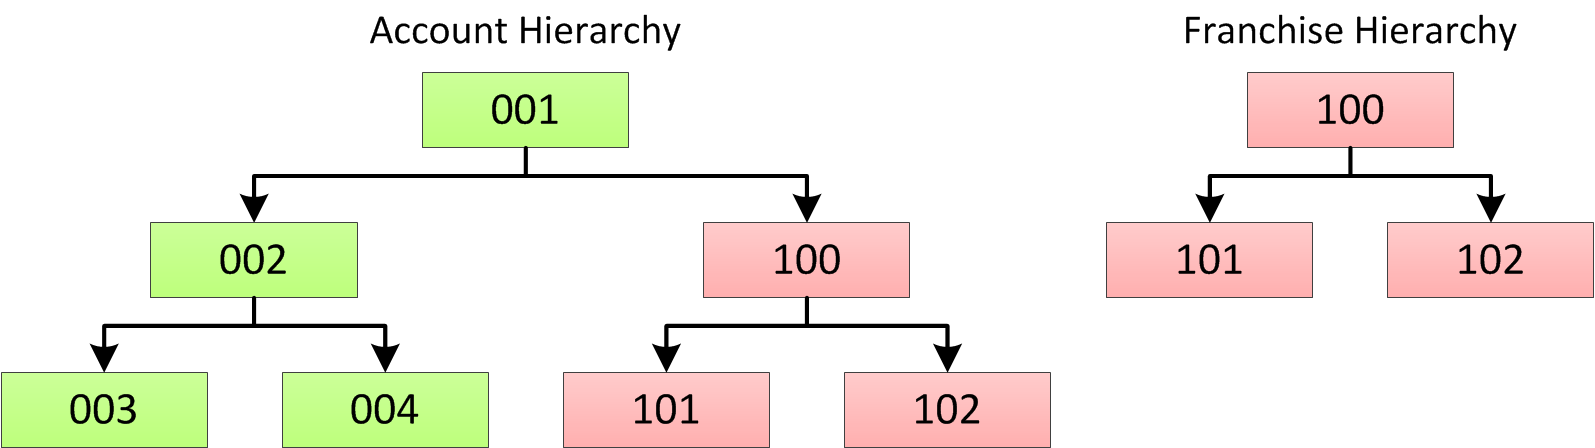 A mulitdimensional hierarchy. The records in the franchise hiearchy also appear in the account hiearchy. 
			 